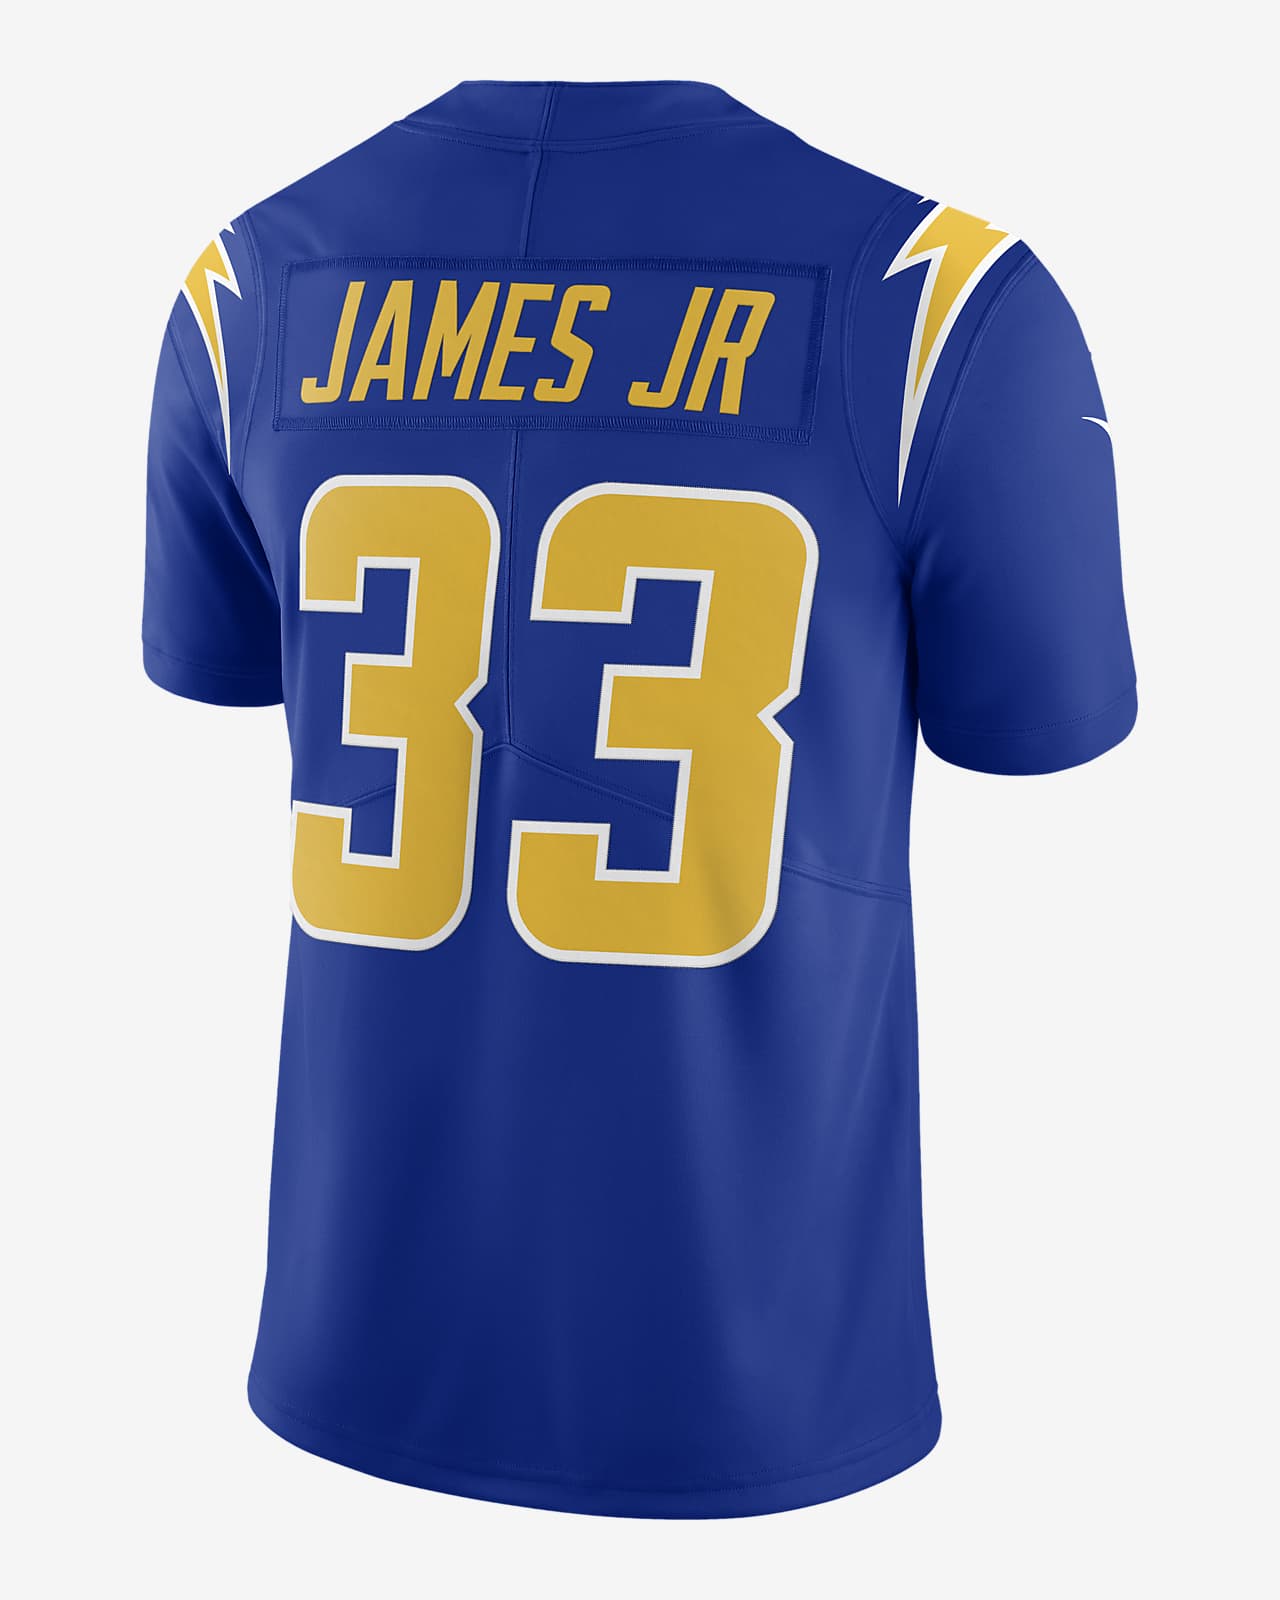 chargers vapor jersey